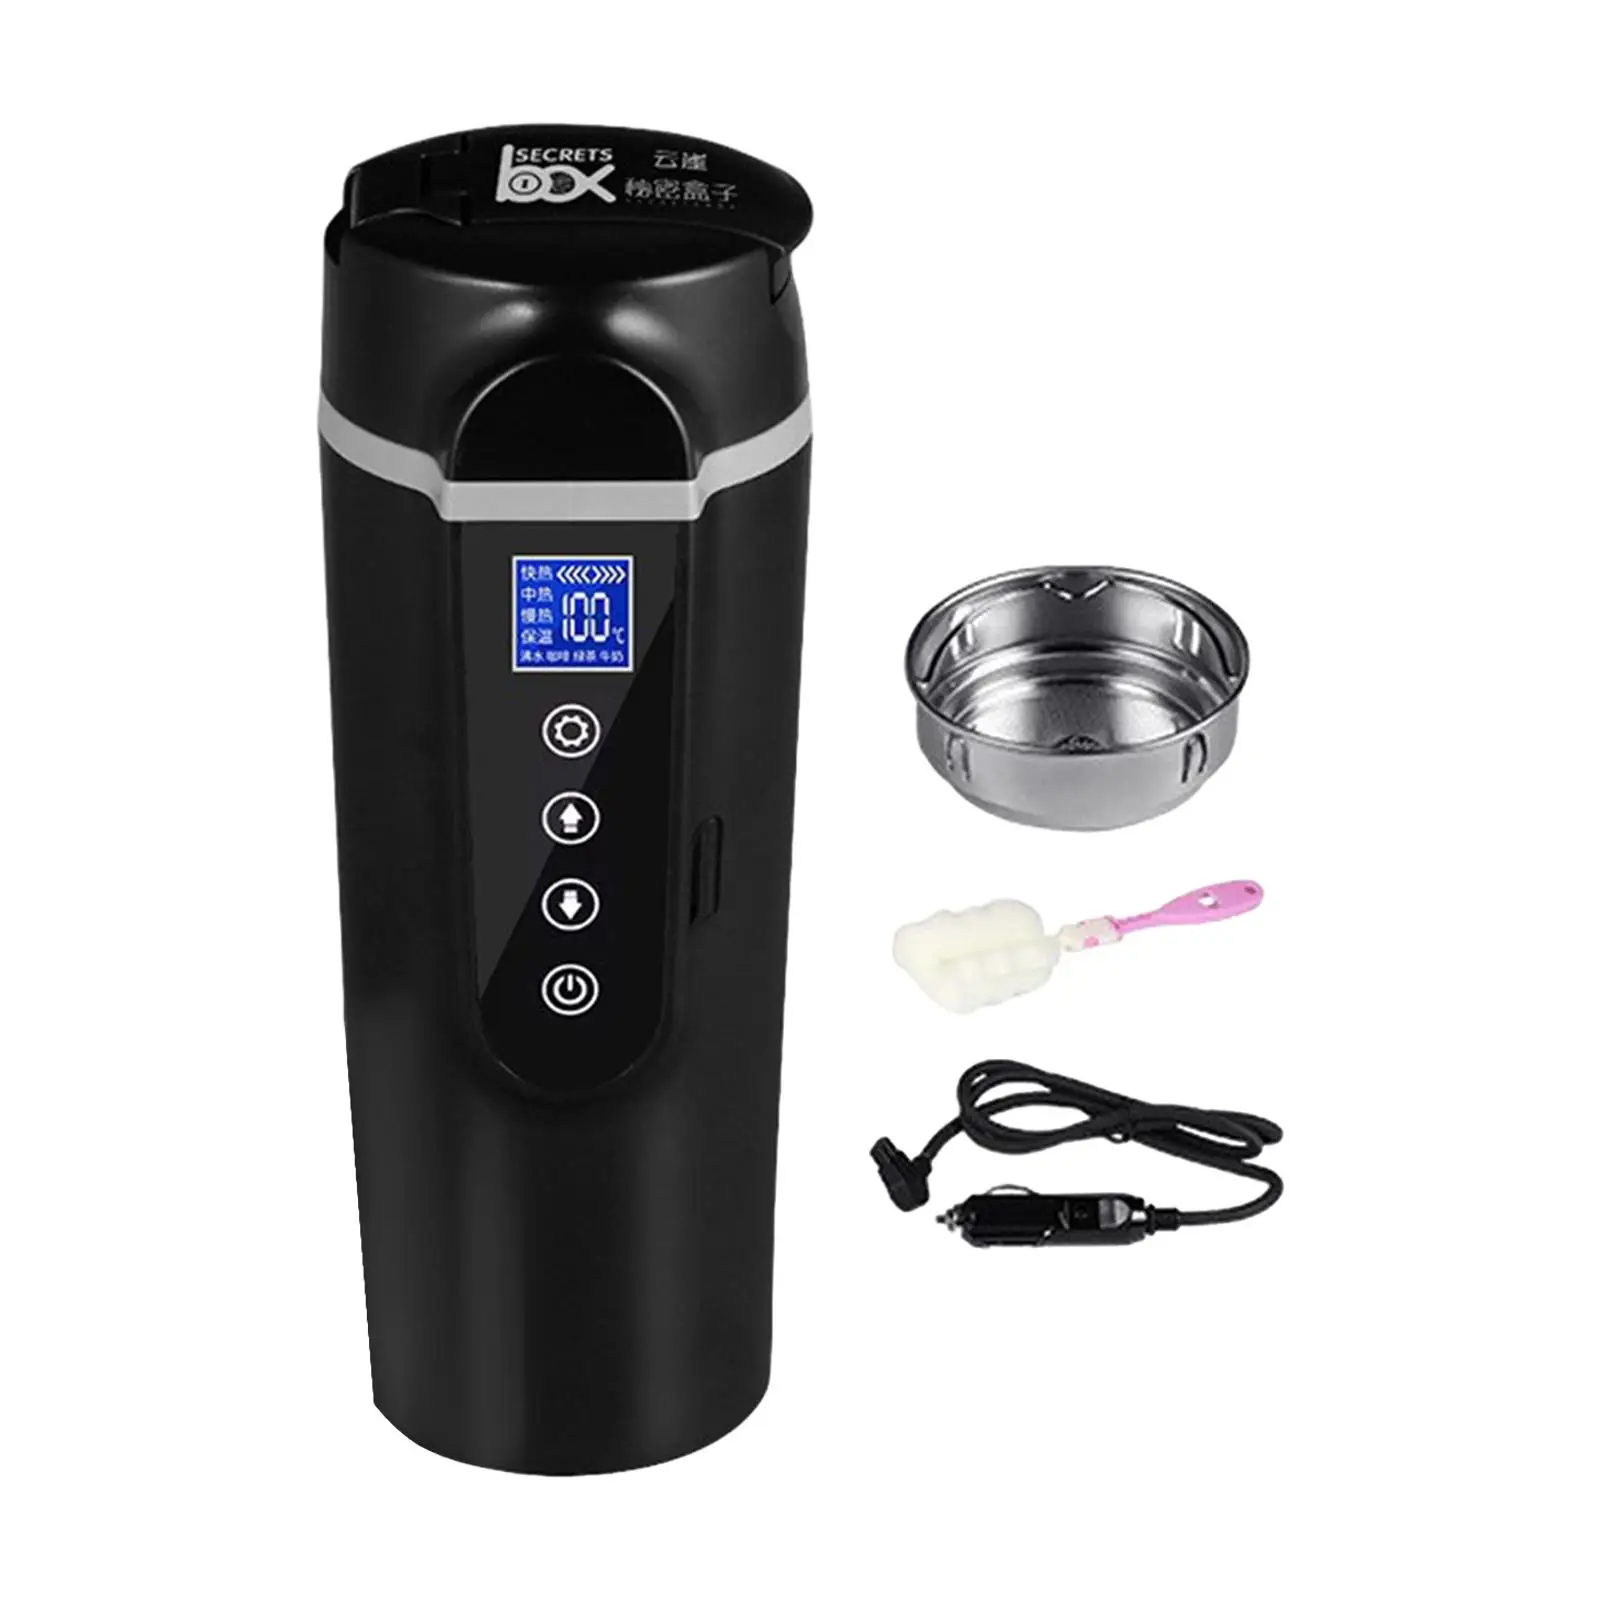 Car Heating Cup Large LED Display Screen Smart Leakproof Travel Coffee Mug for Drivers Auto Car Airplane Camping Tea Water Milk